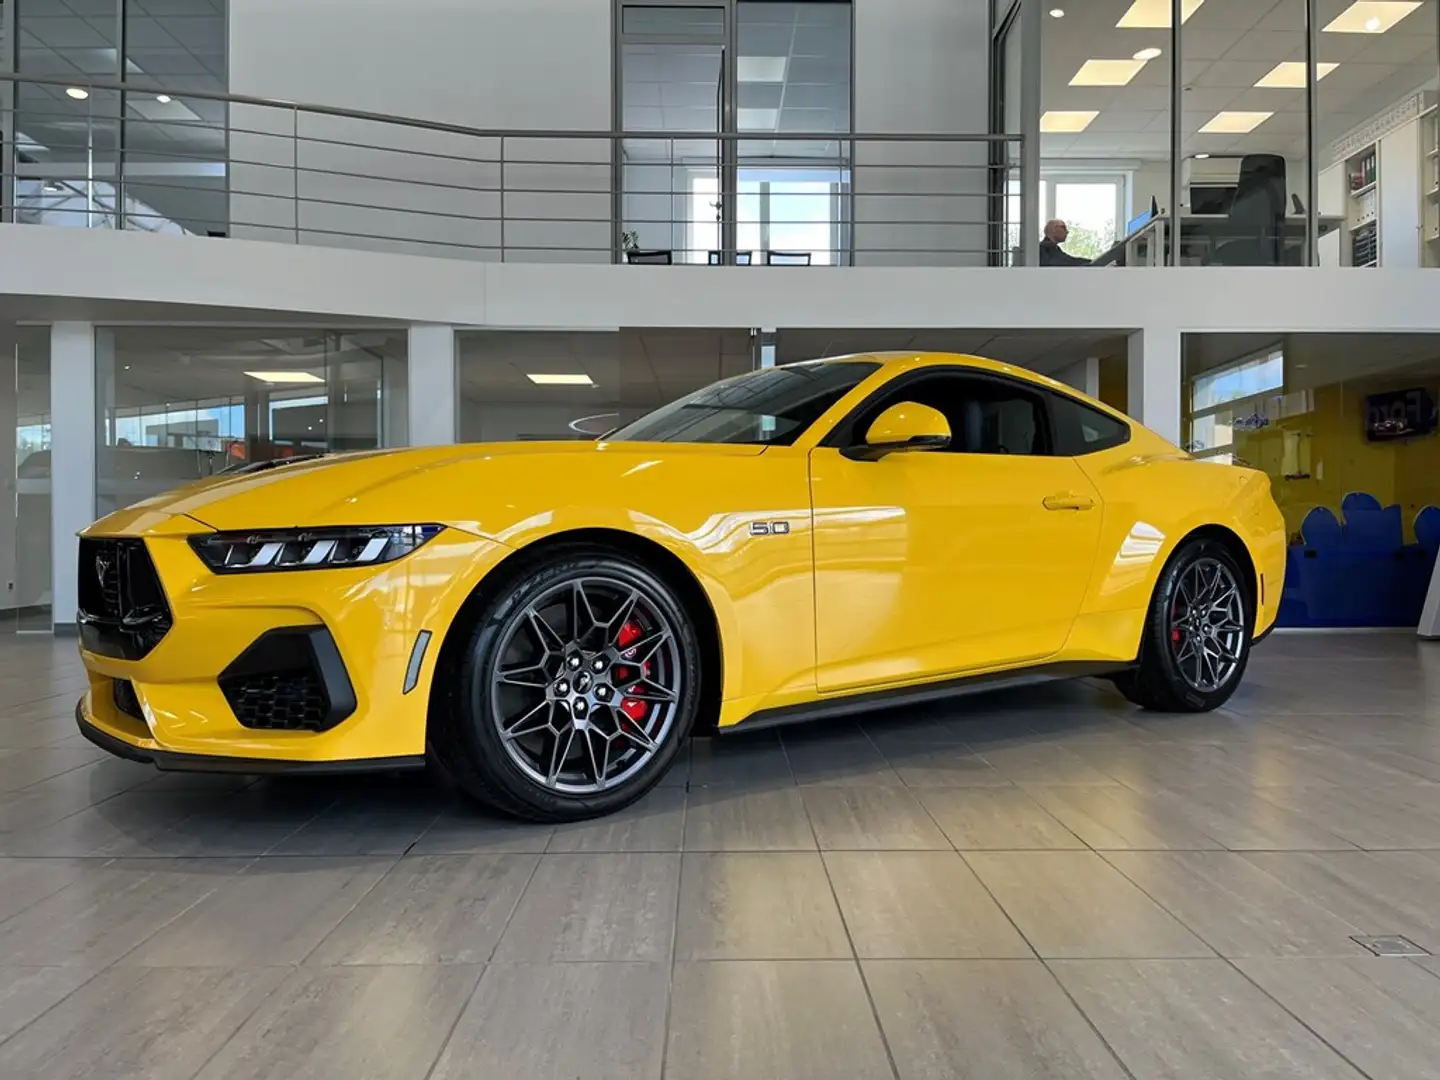 Ford Mustang GT Fastback S650 5.0i V8 446PK A10  MagneRide // Y Yellow - 2